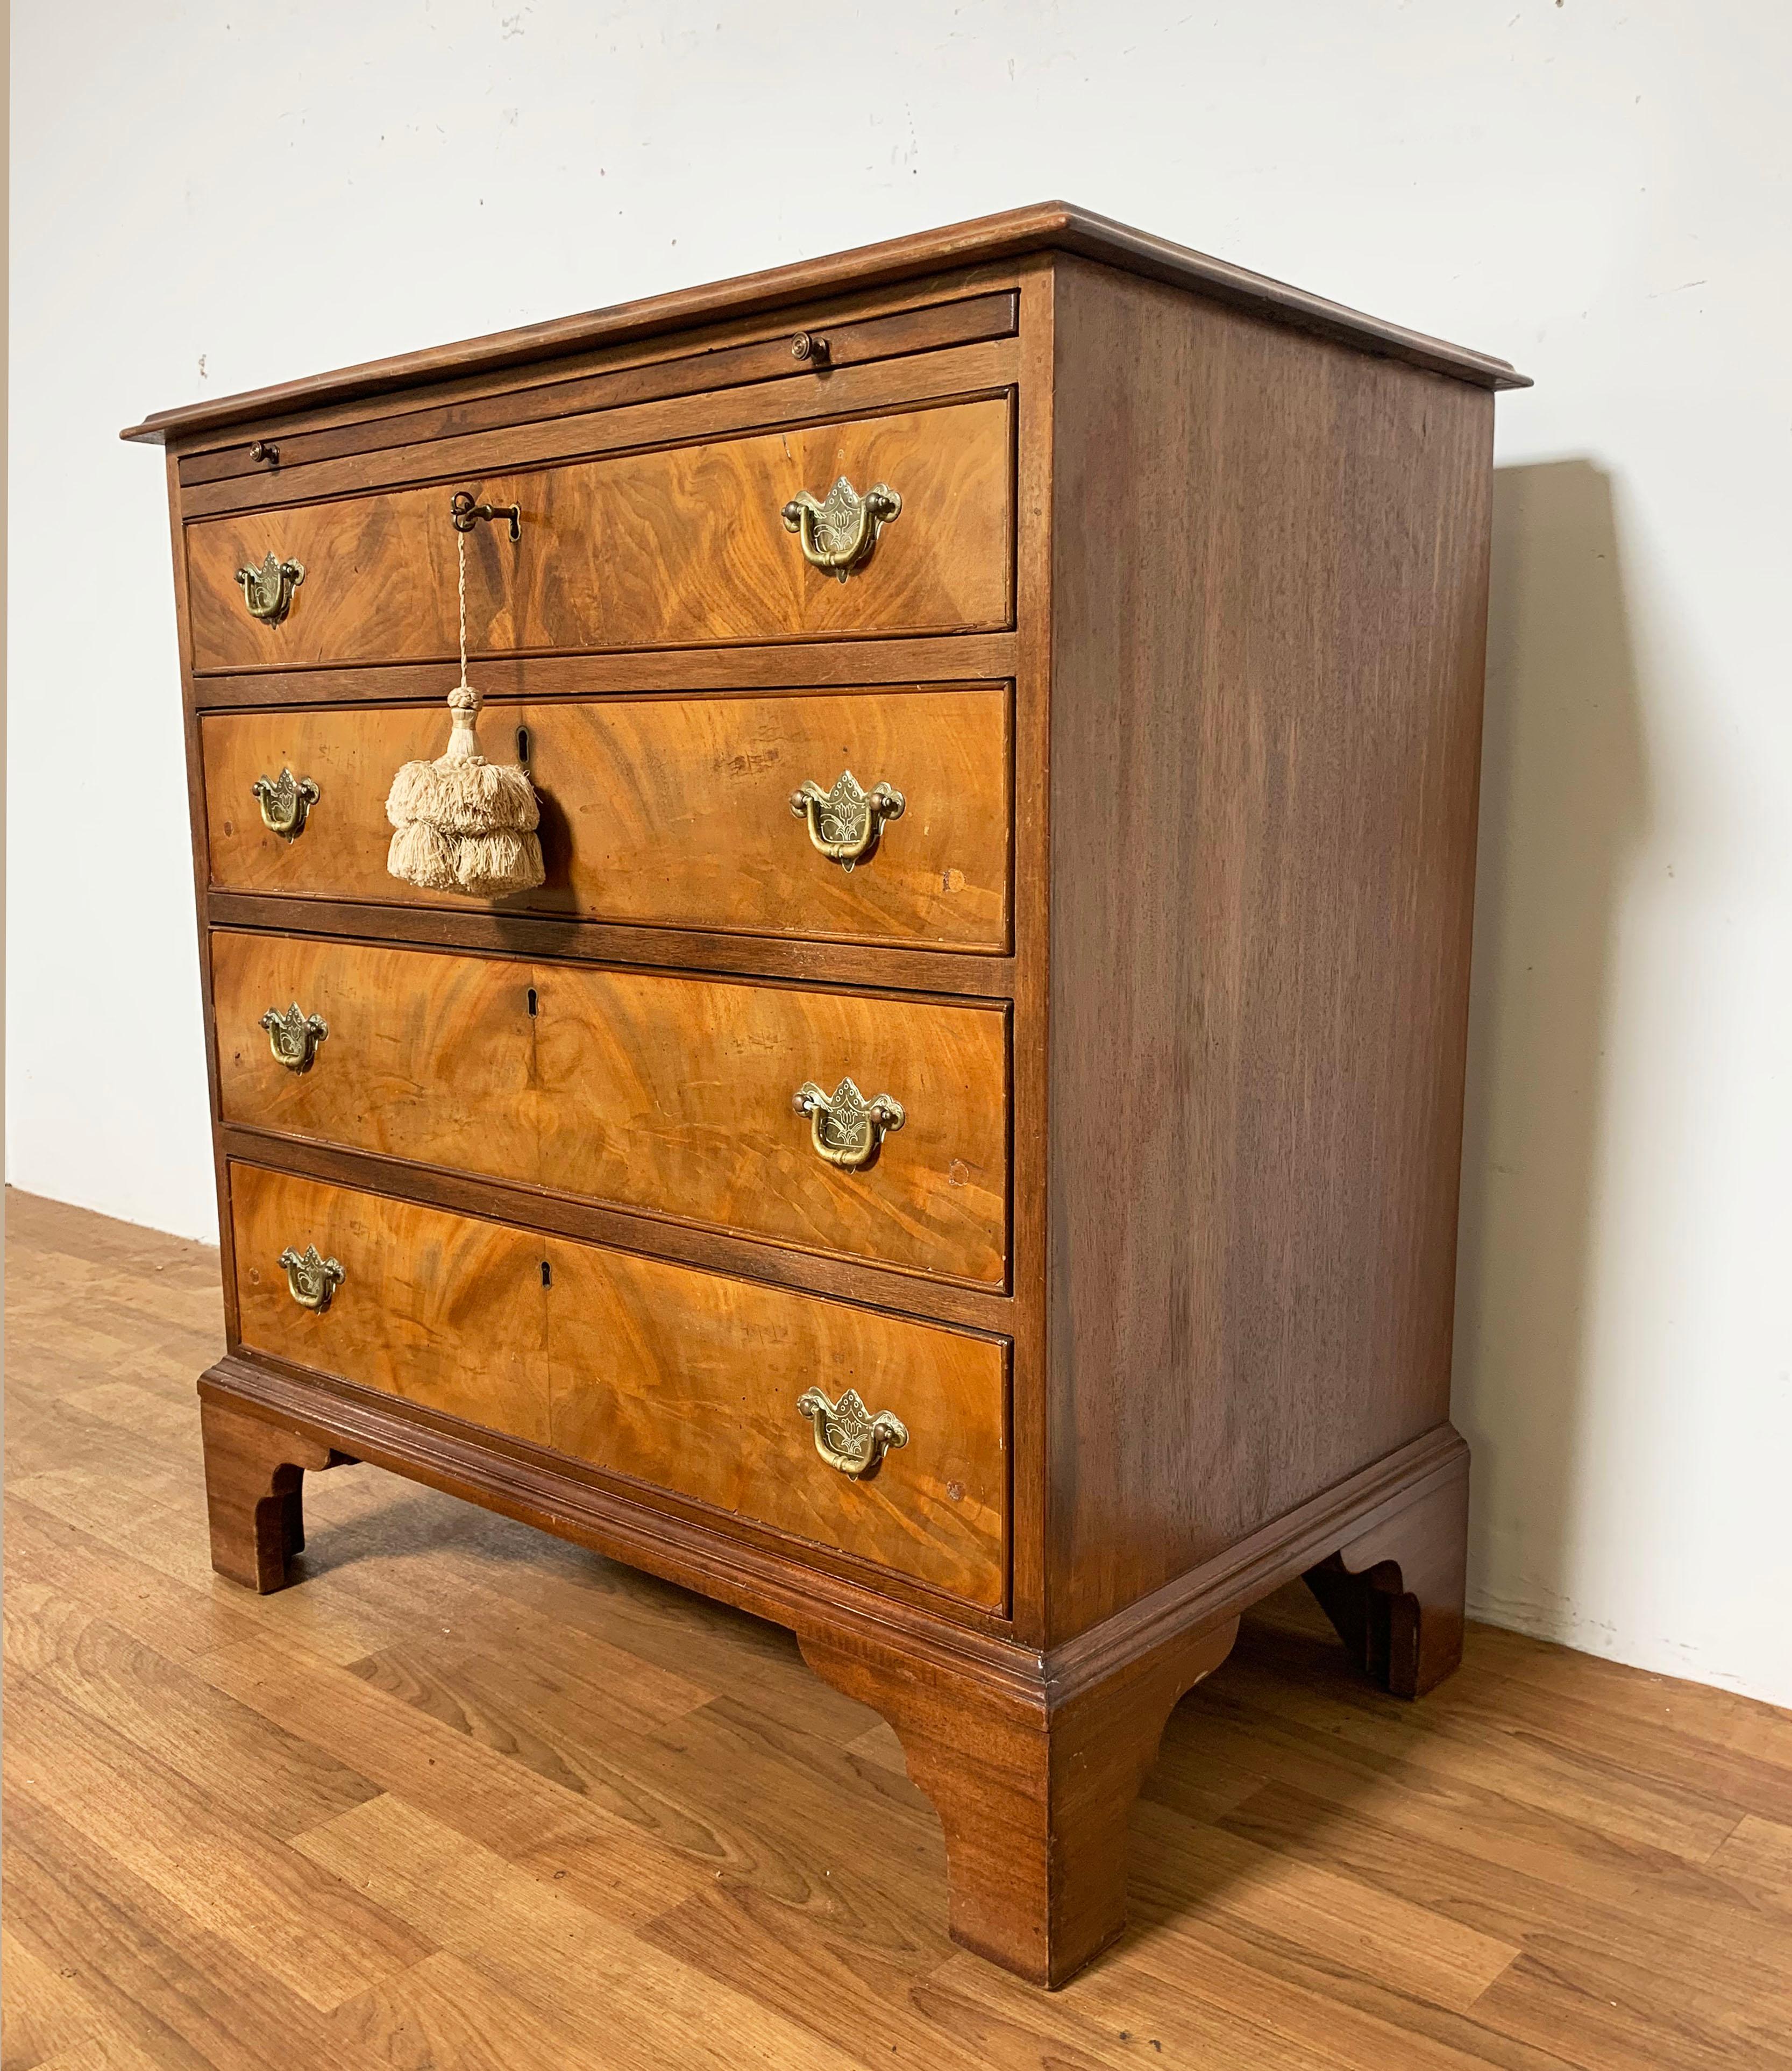 An English Chippendale chest of four drawers circa late 18th century. Mahogany, with dressing slide and mounted on bracket feet. Original brasses. Working key in top drawer, currently fitted with felt insert for storage of silver cutlery.